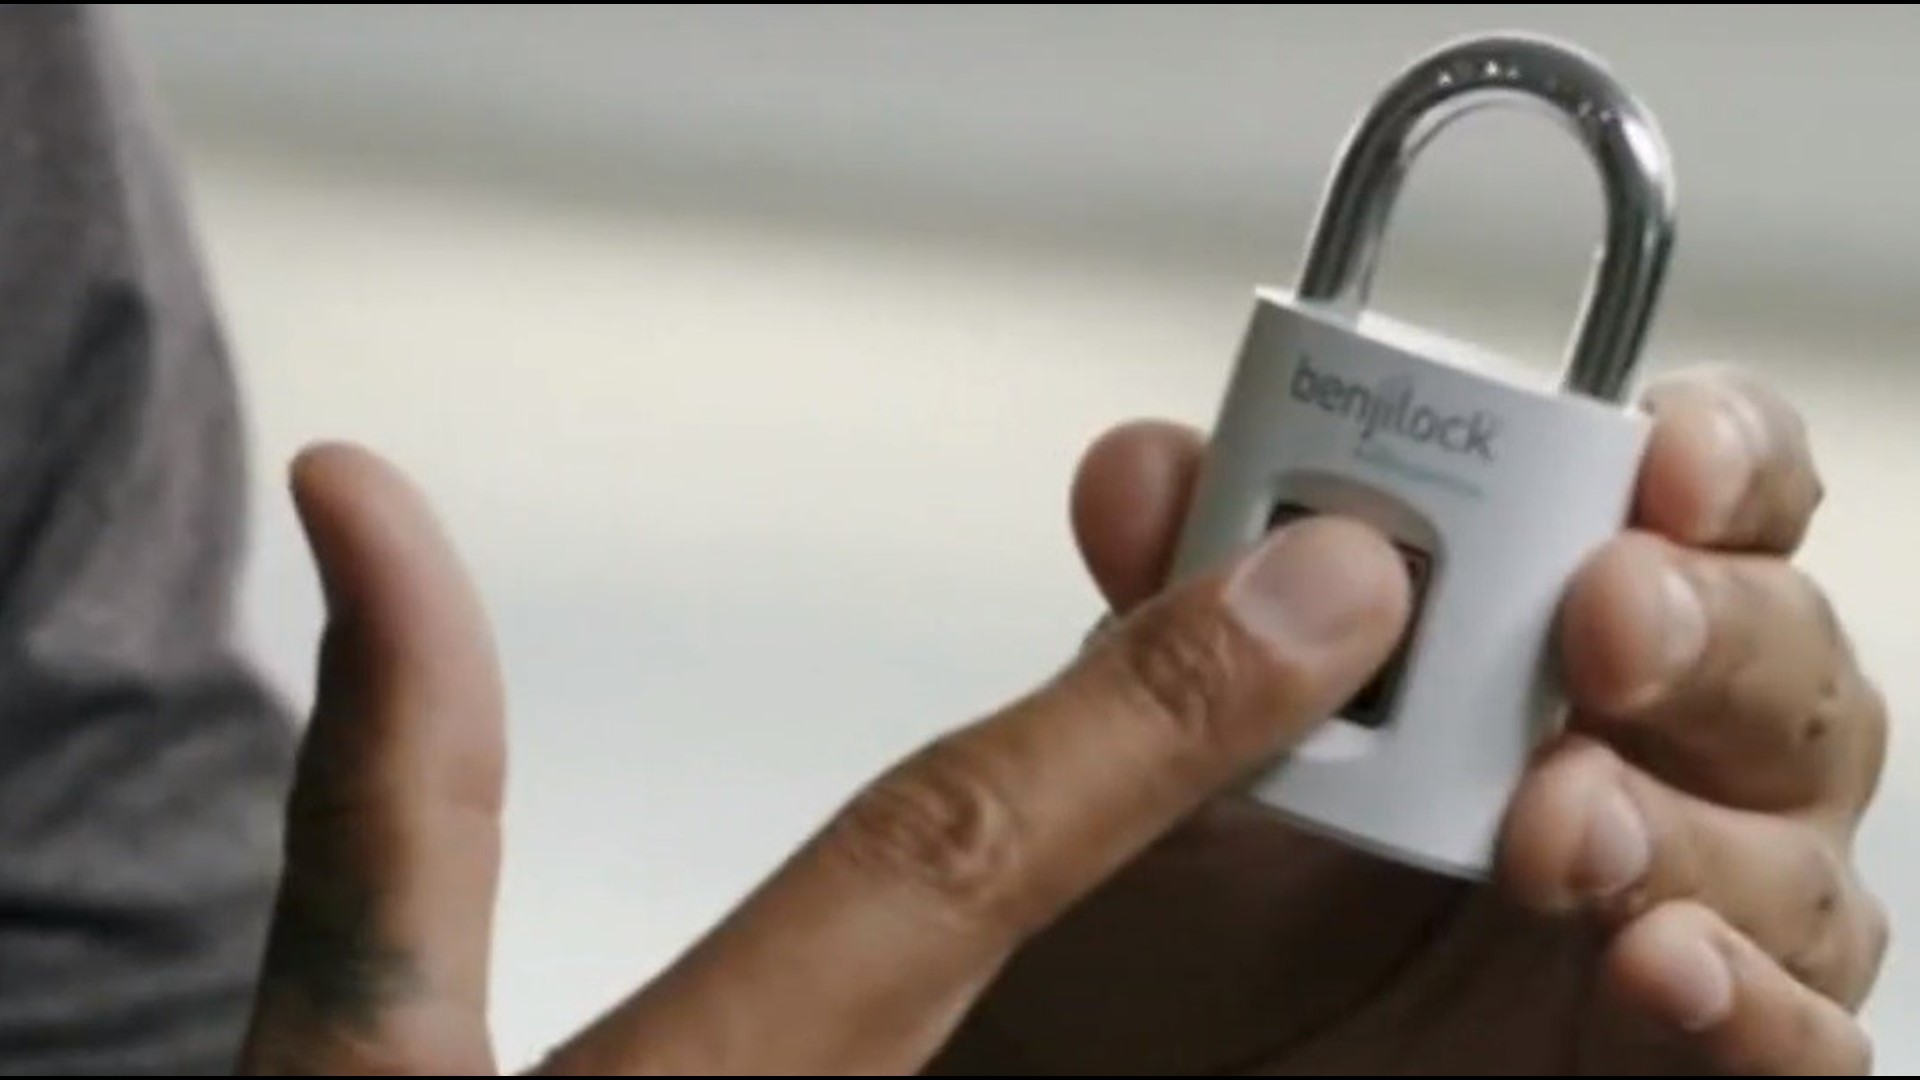 A new product that uses your fingerprint instead of a key or combination.